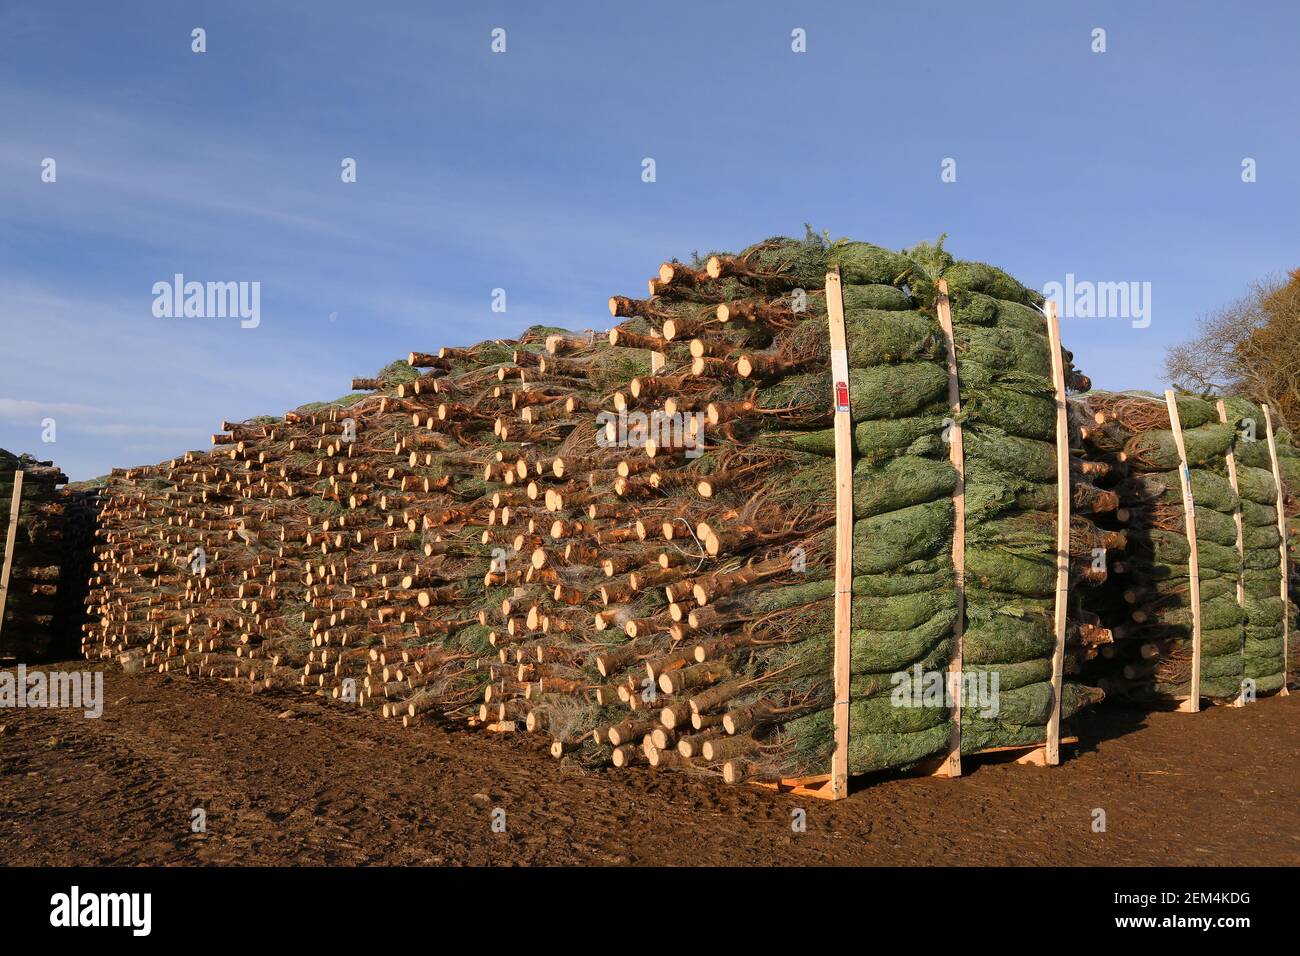 Christmas tree farm with fir trees cut down for buyers just before Christmas Stock Photo